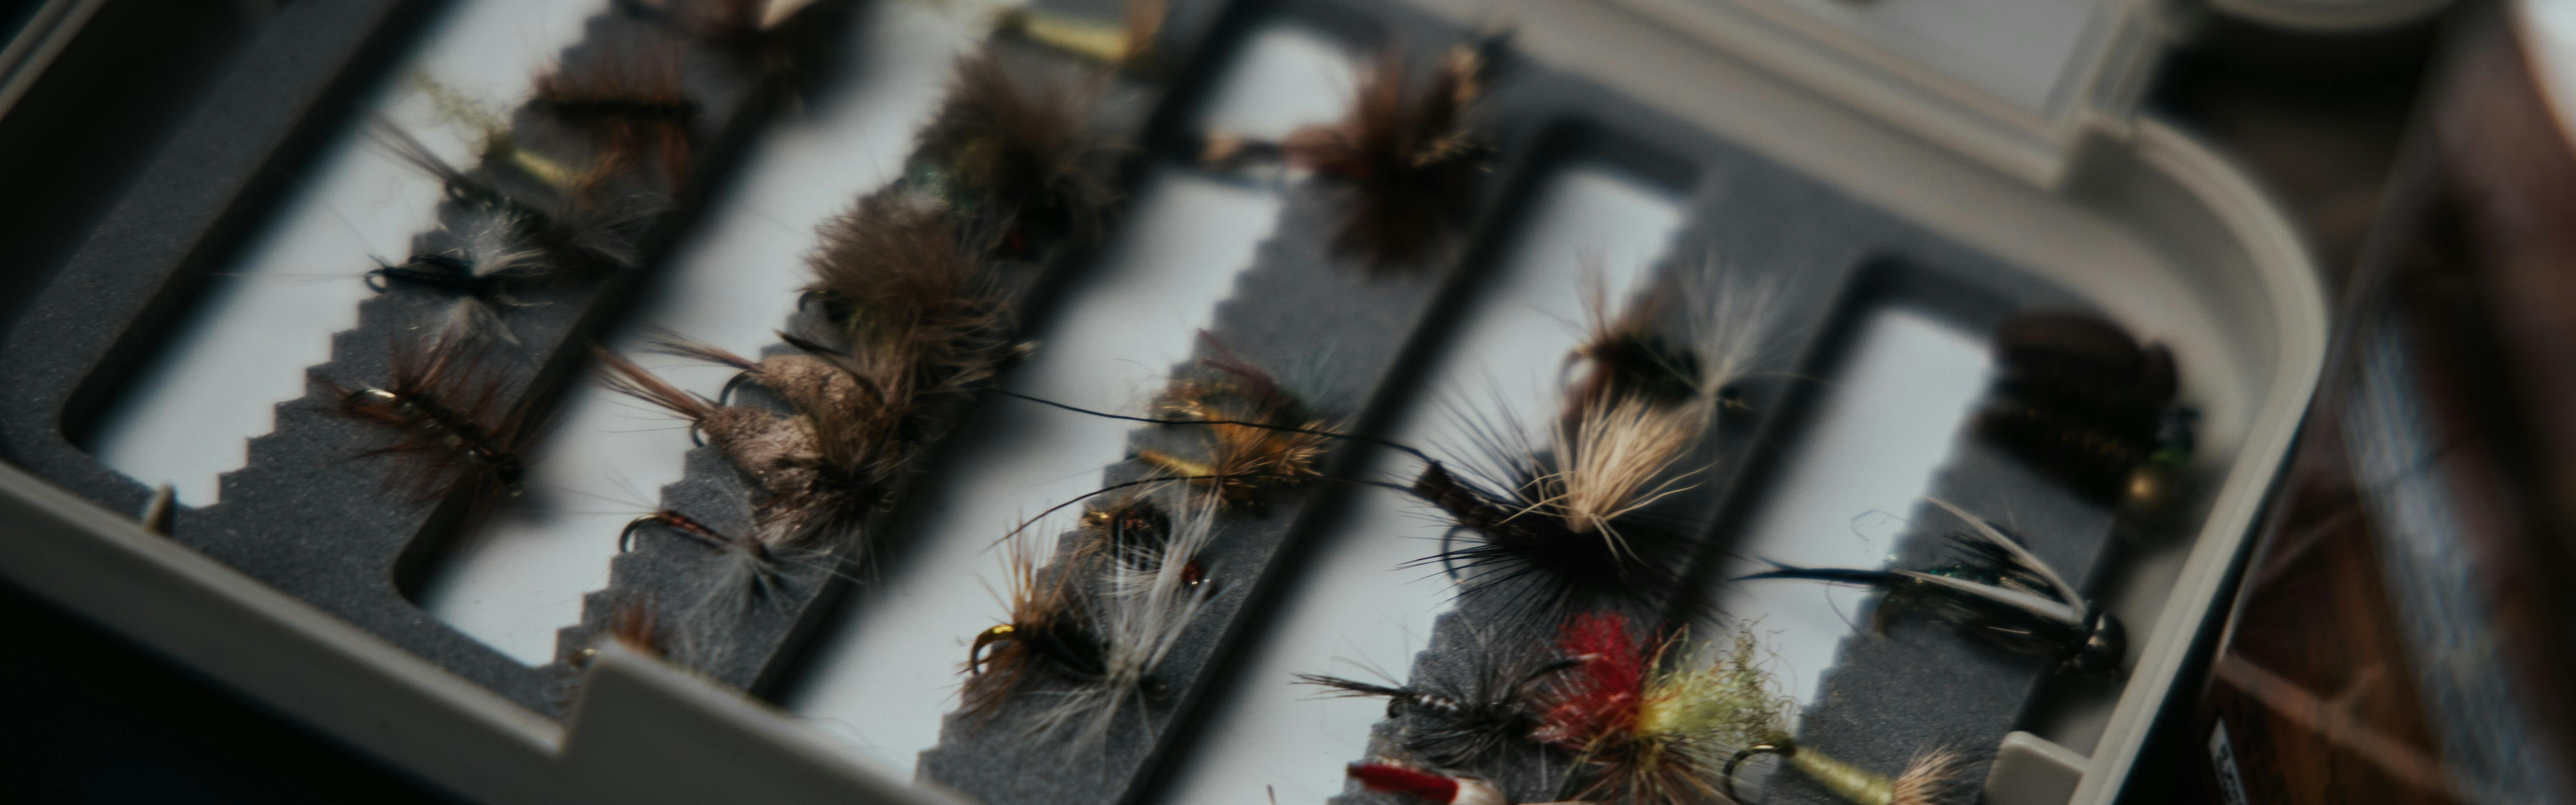 Building a Better Fly Box: Understanding and Identifying Fly